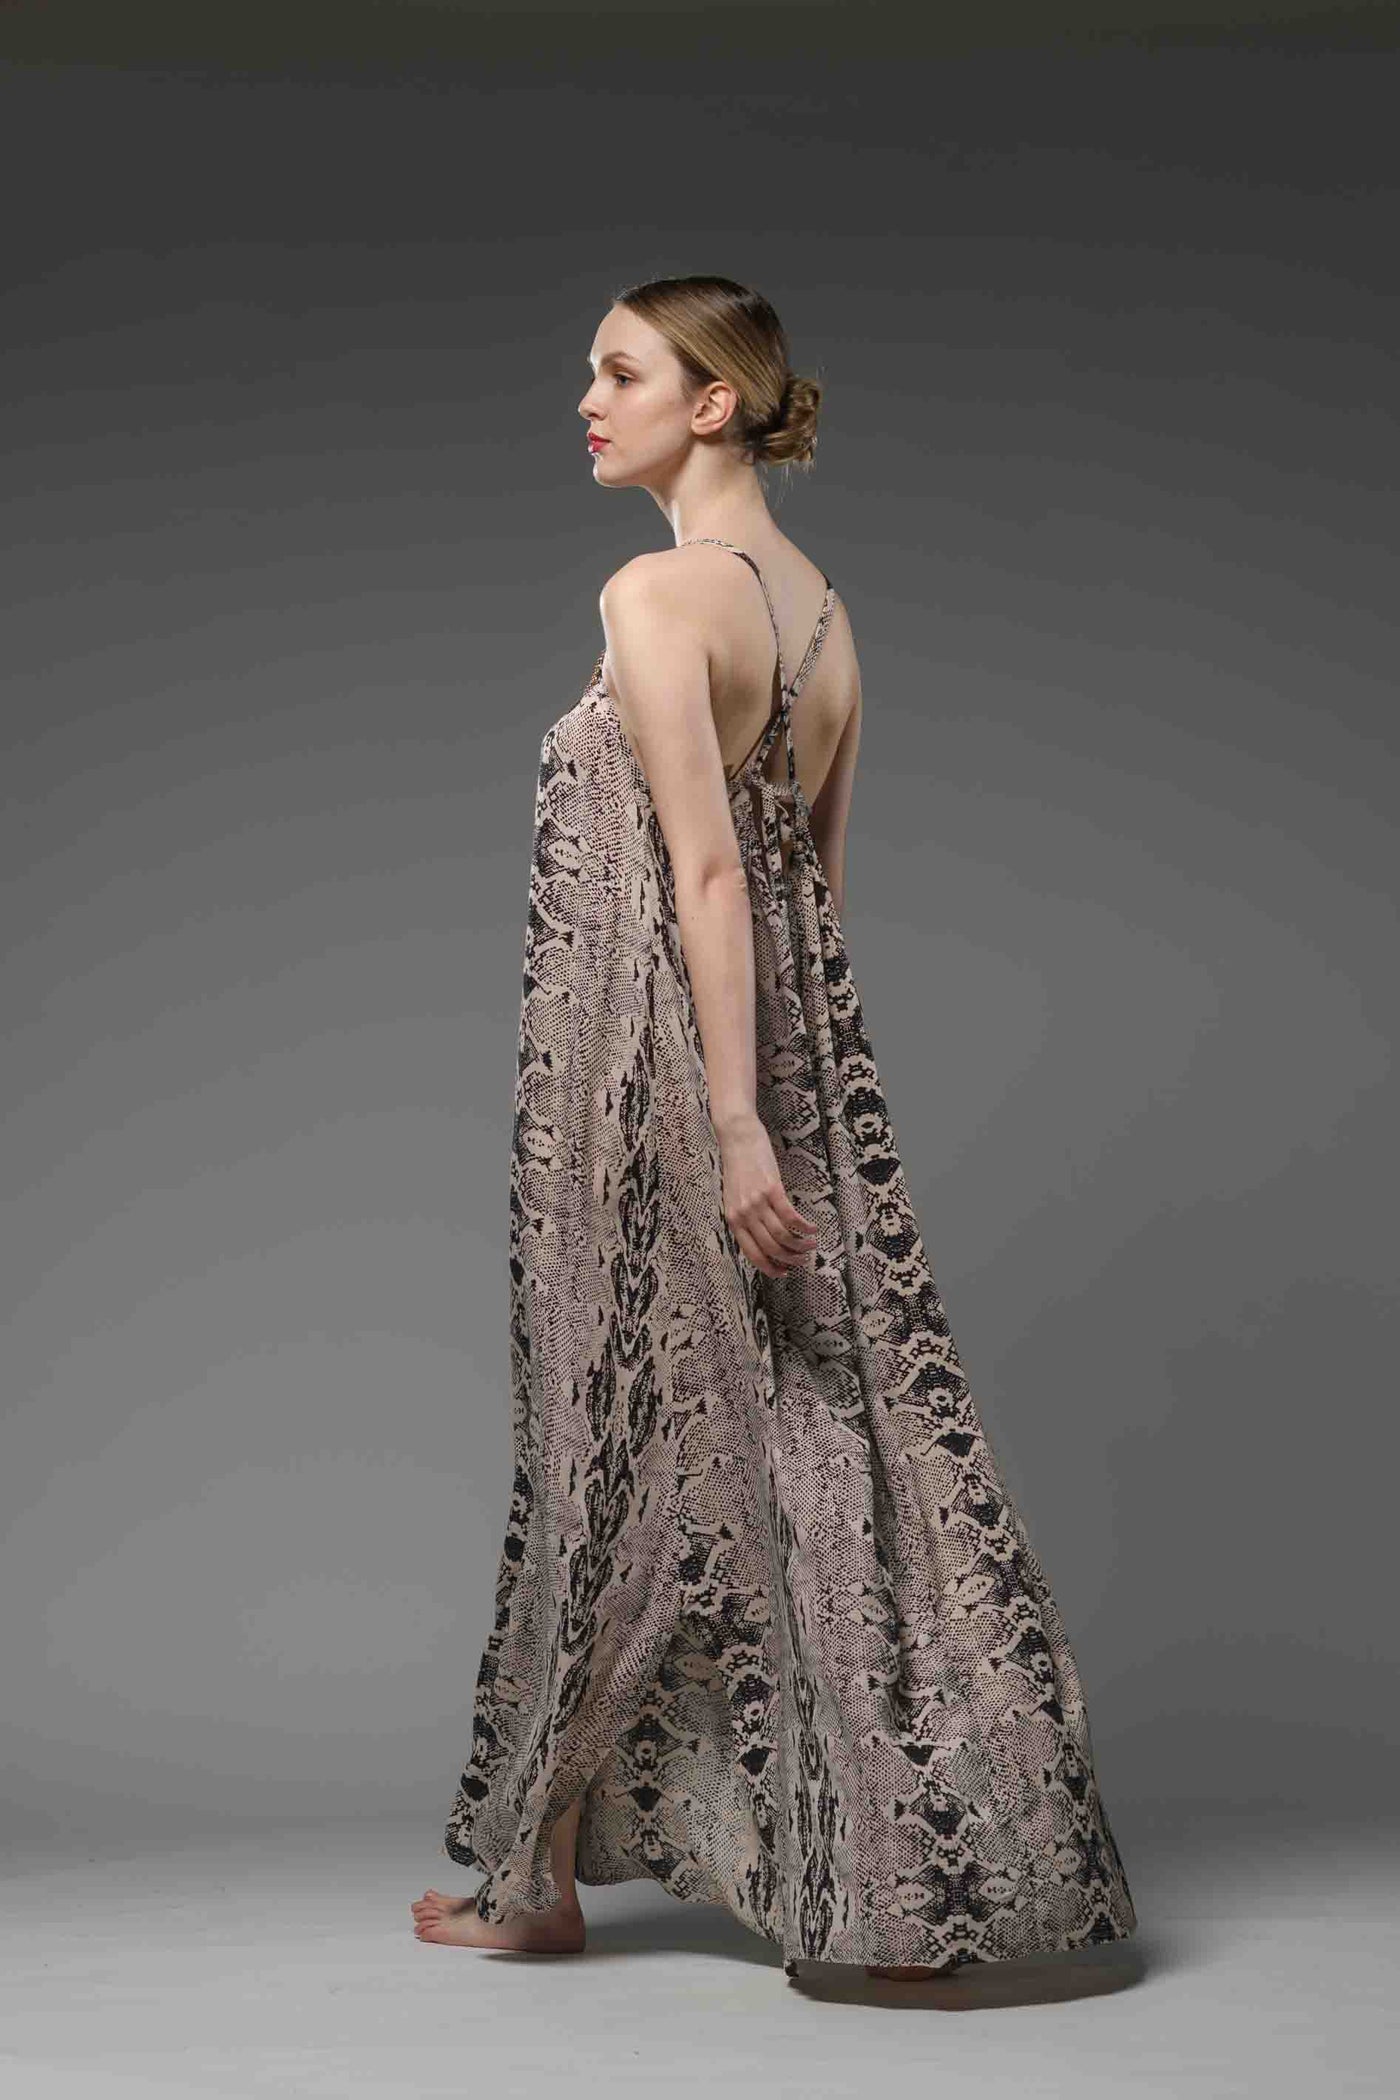 Backless python print spaghetti cross in back spaghetti straps A-line long dress with embroidered brass beaded neck line